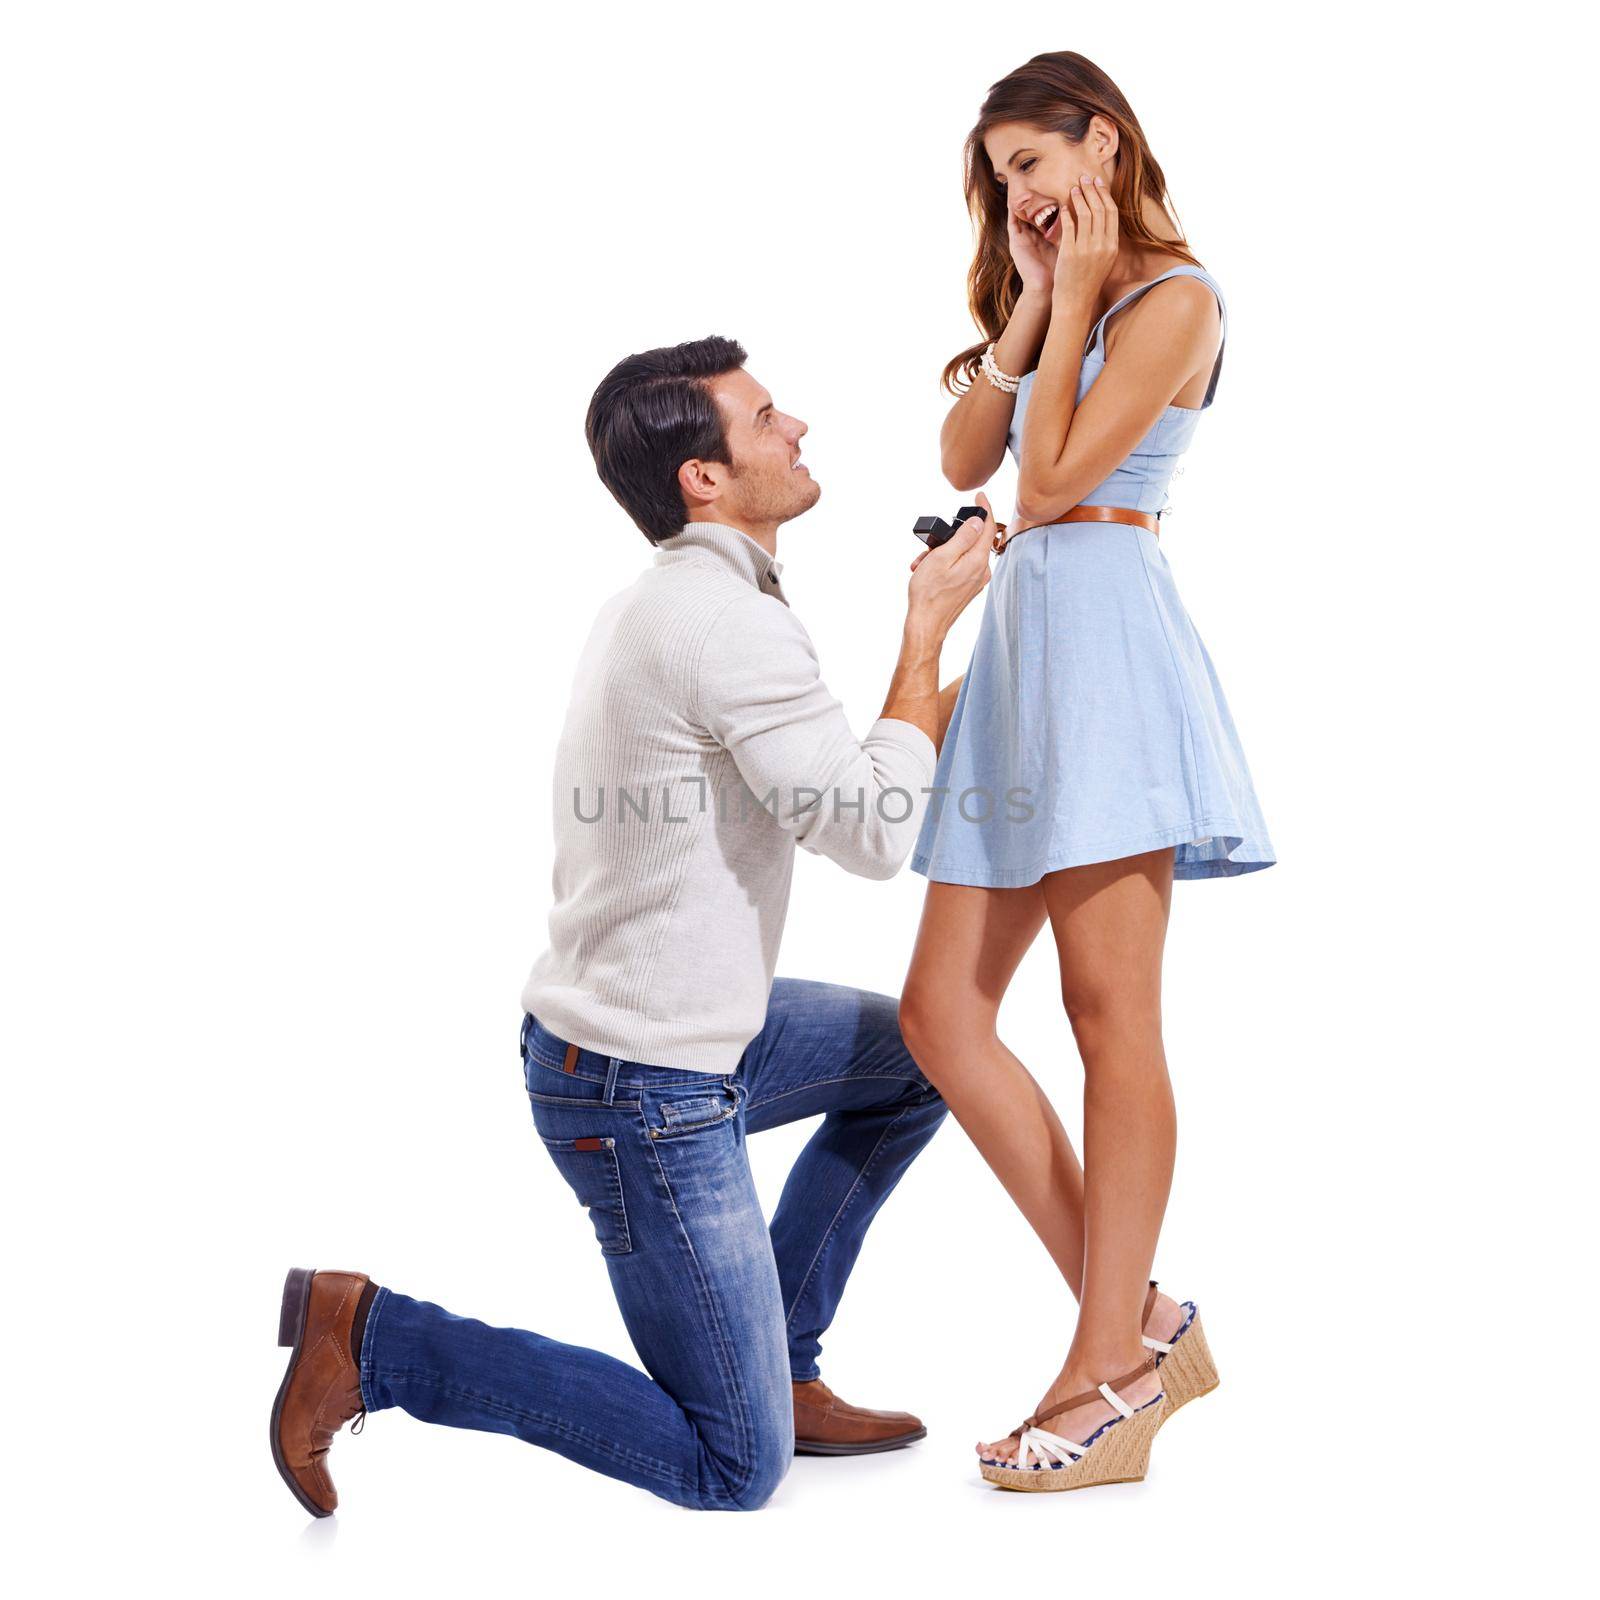 Full-length studio shot of a young couple getting engaged isolated on white.